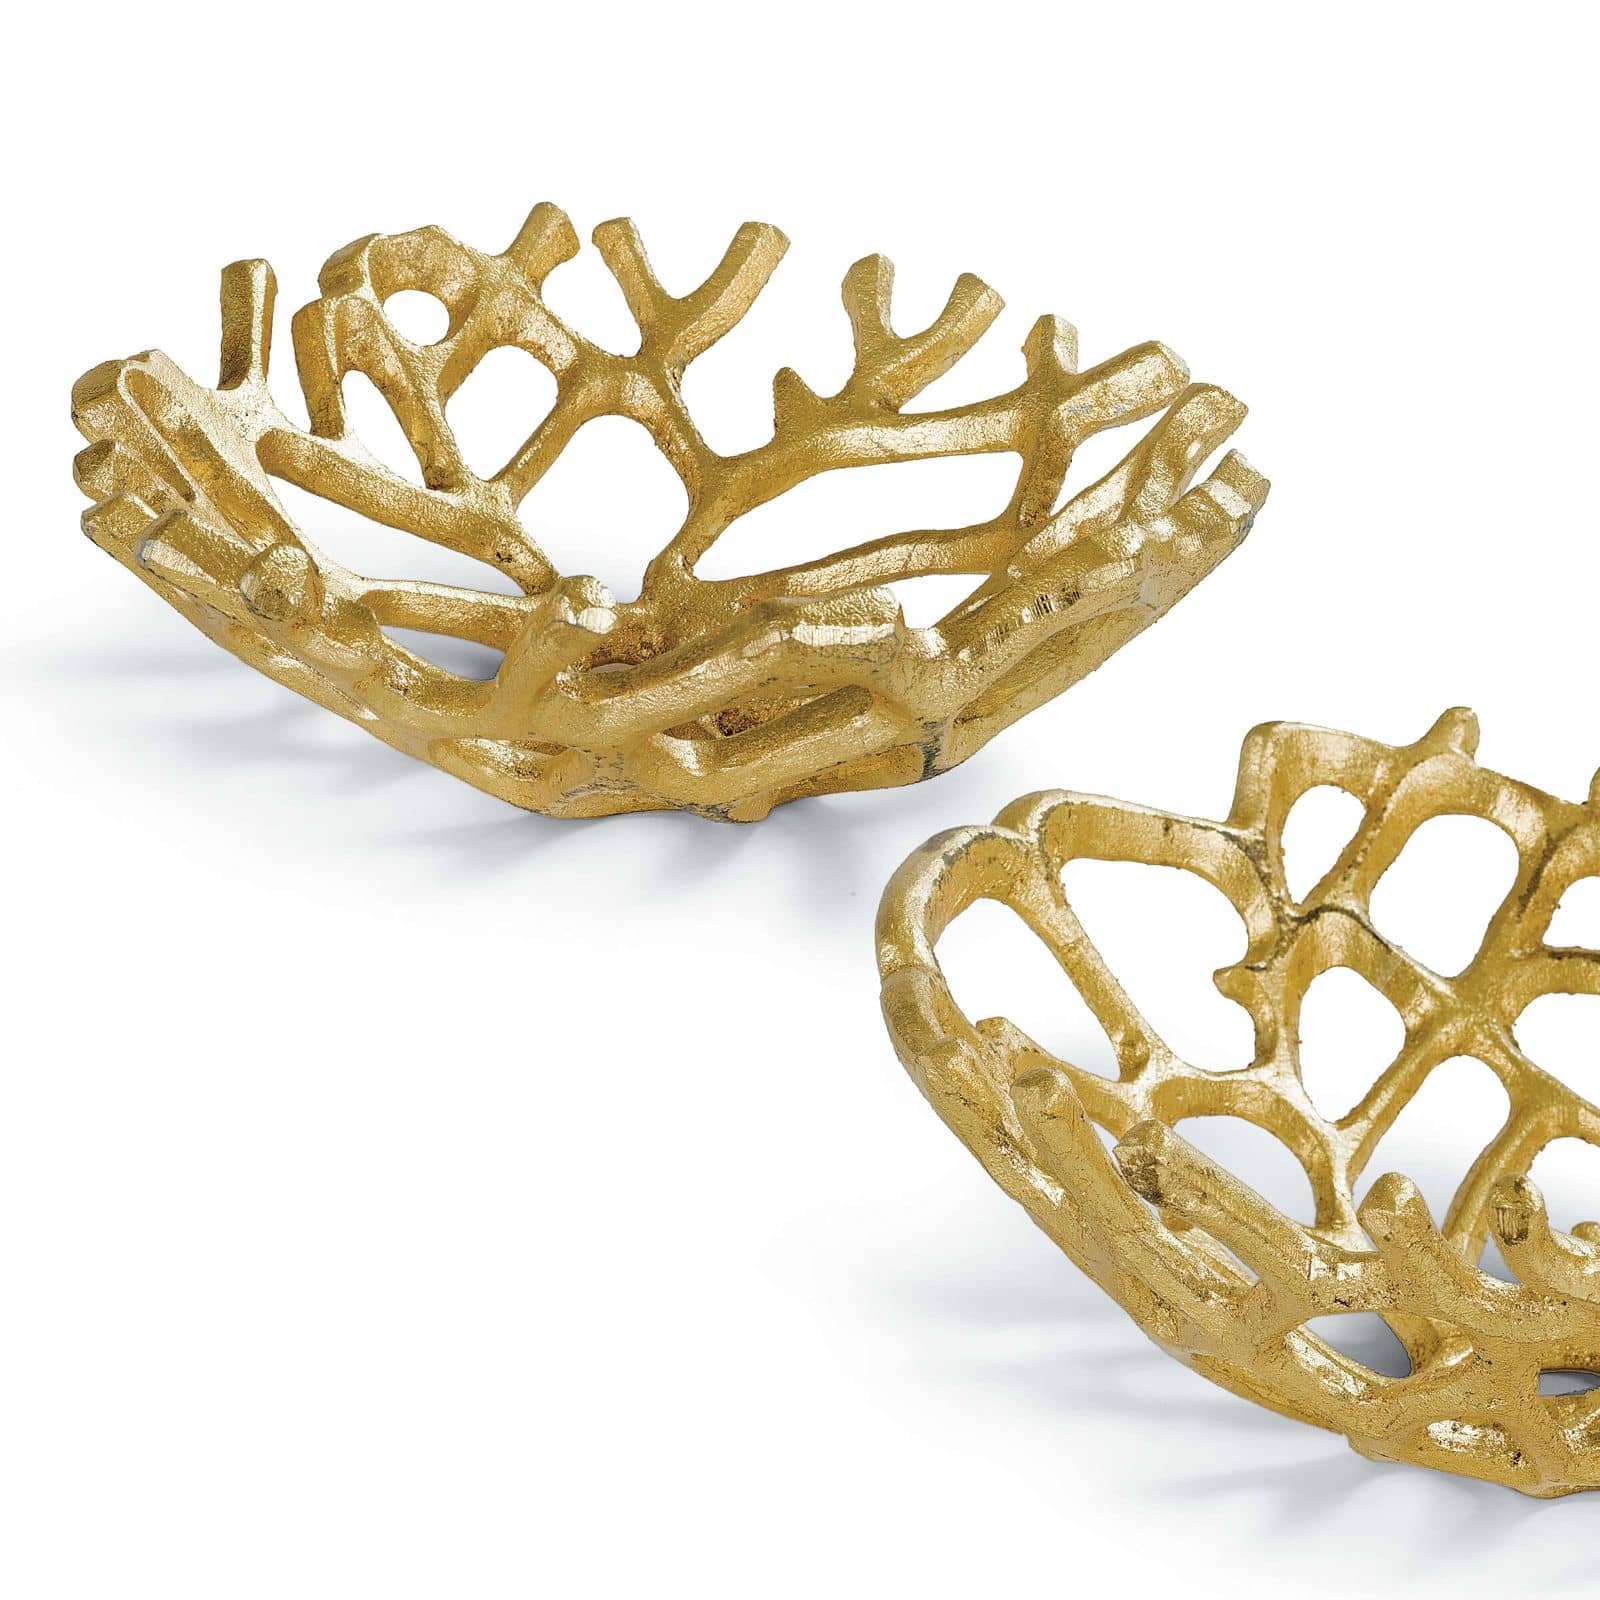 Web Bowl Set of 2 in Gilded by Regina Andrew